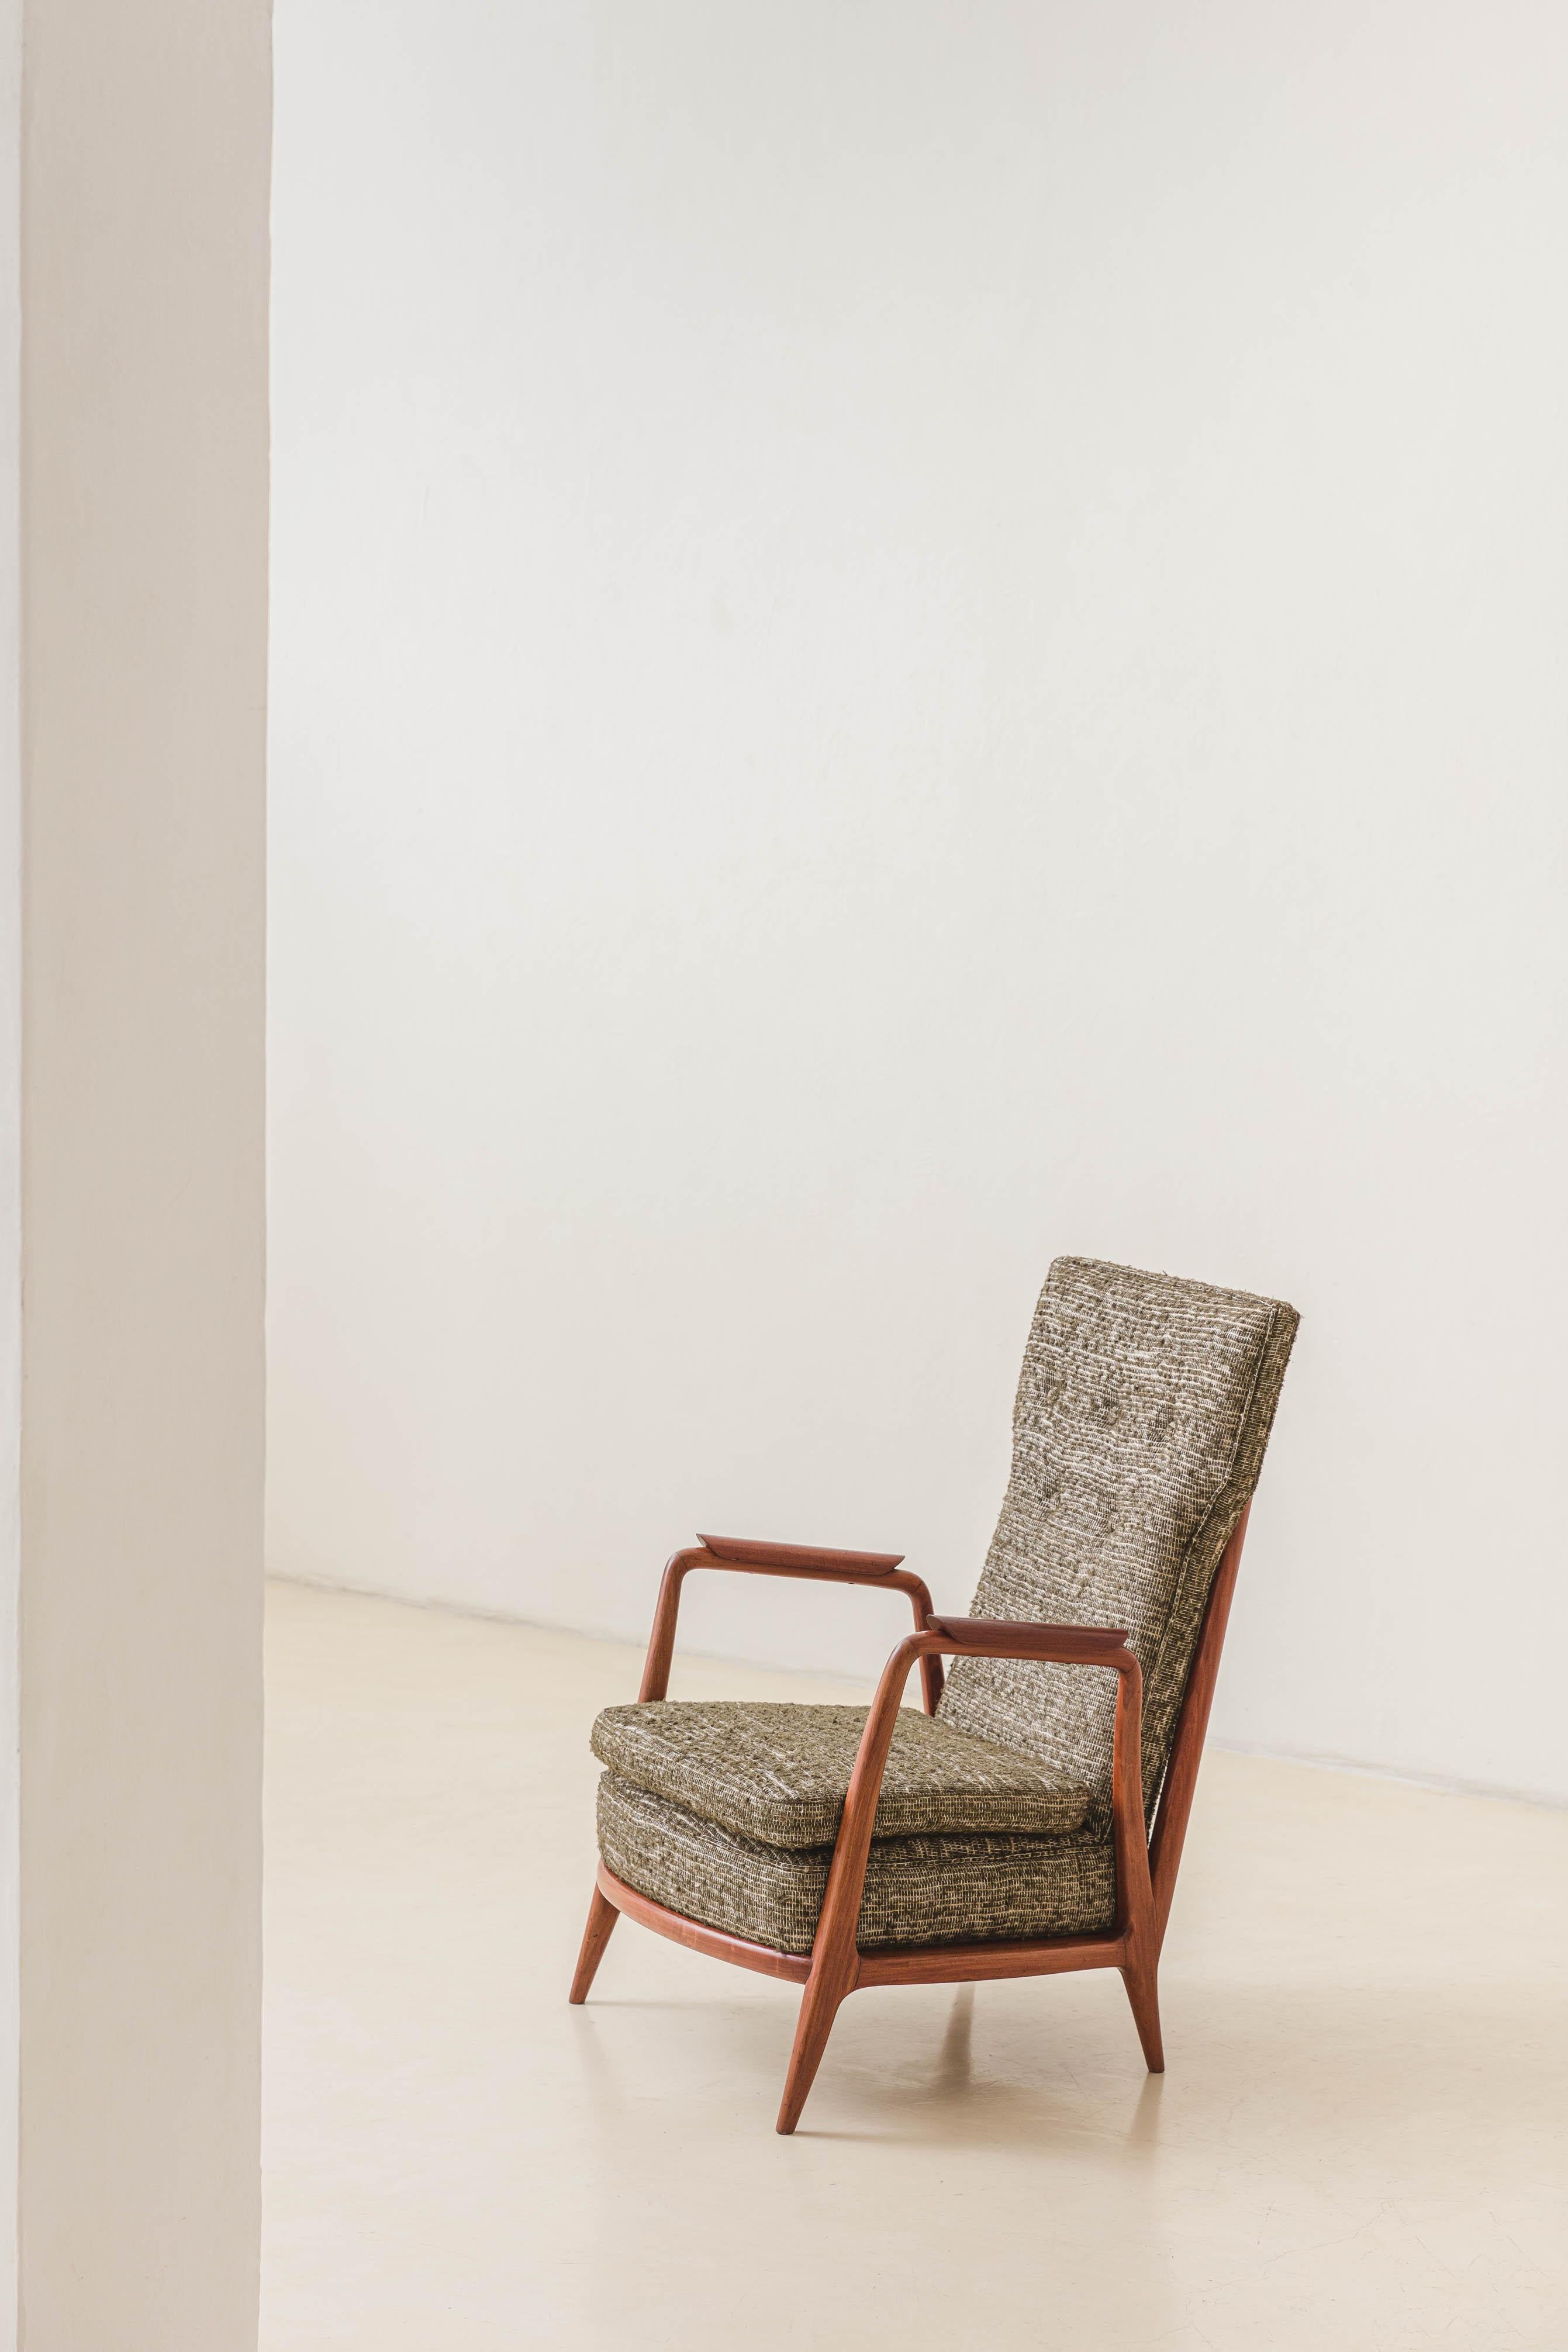 This armchair in solid Caviuna with high backrests was designed by Giuseppe Scapinelli (1911-1982) in the 1950s. The piece has slatted backrests with thin vertical rods and comfortable upholstery with bespoke fabric in organic silk developed by